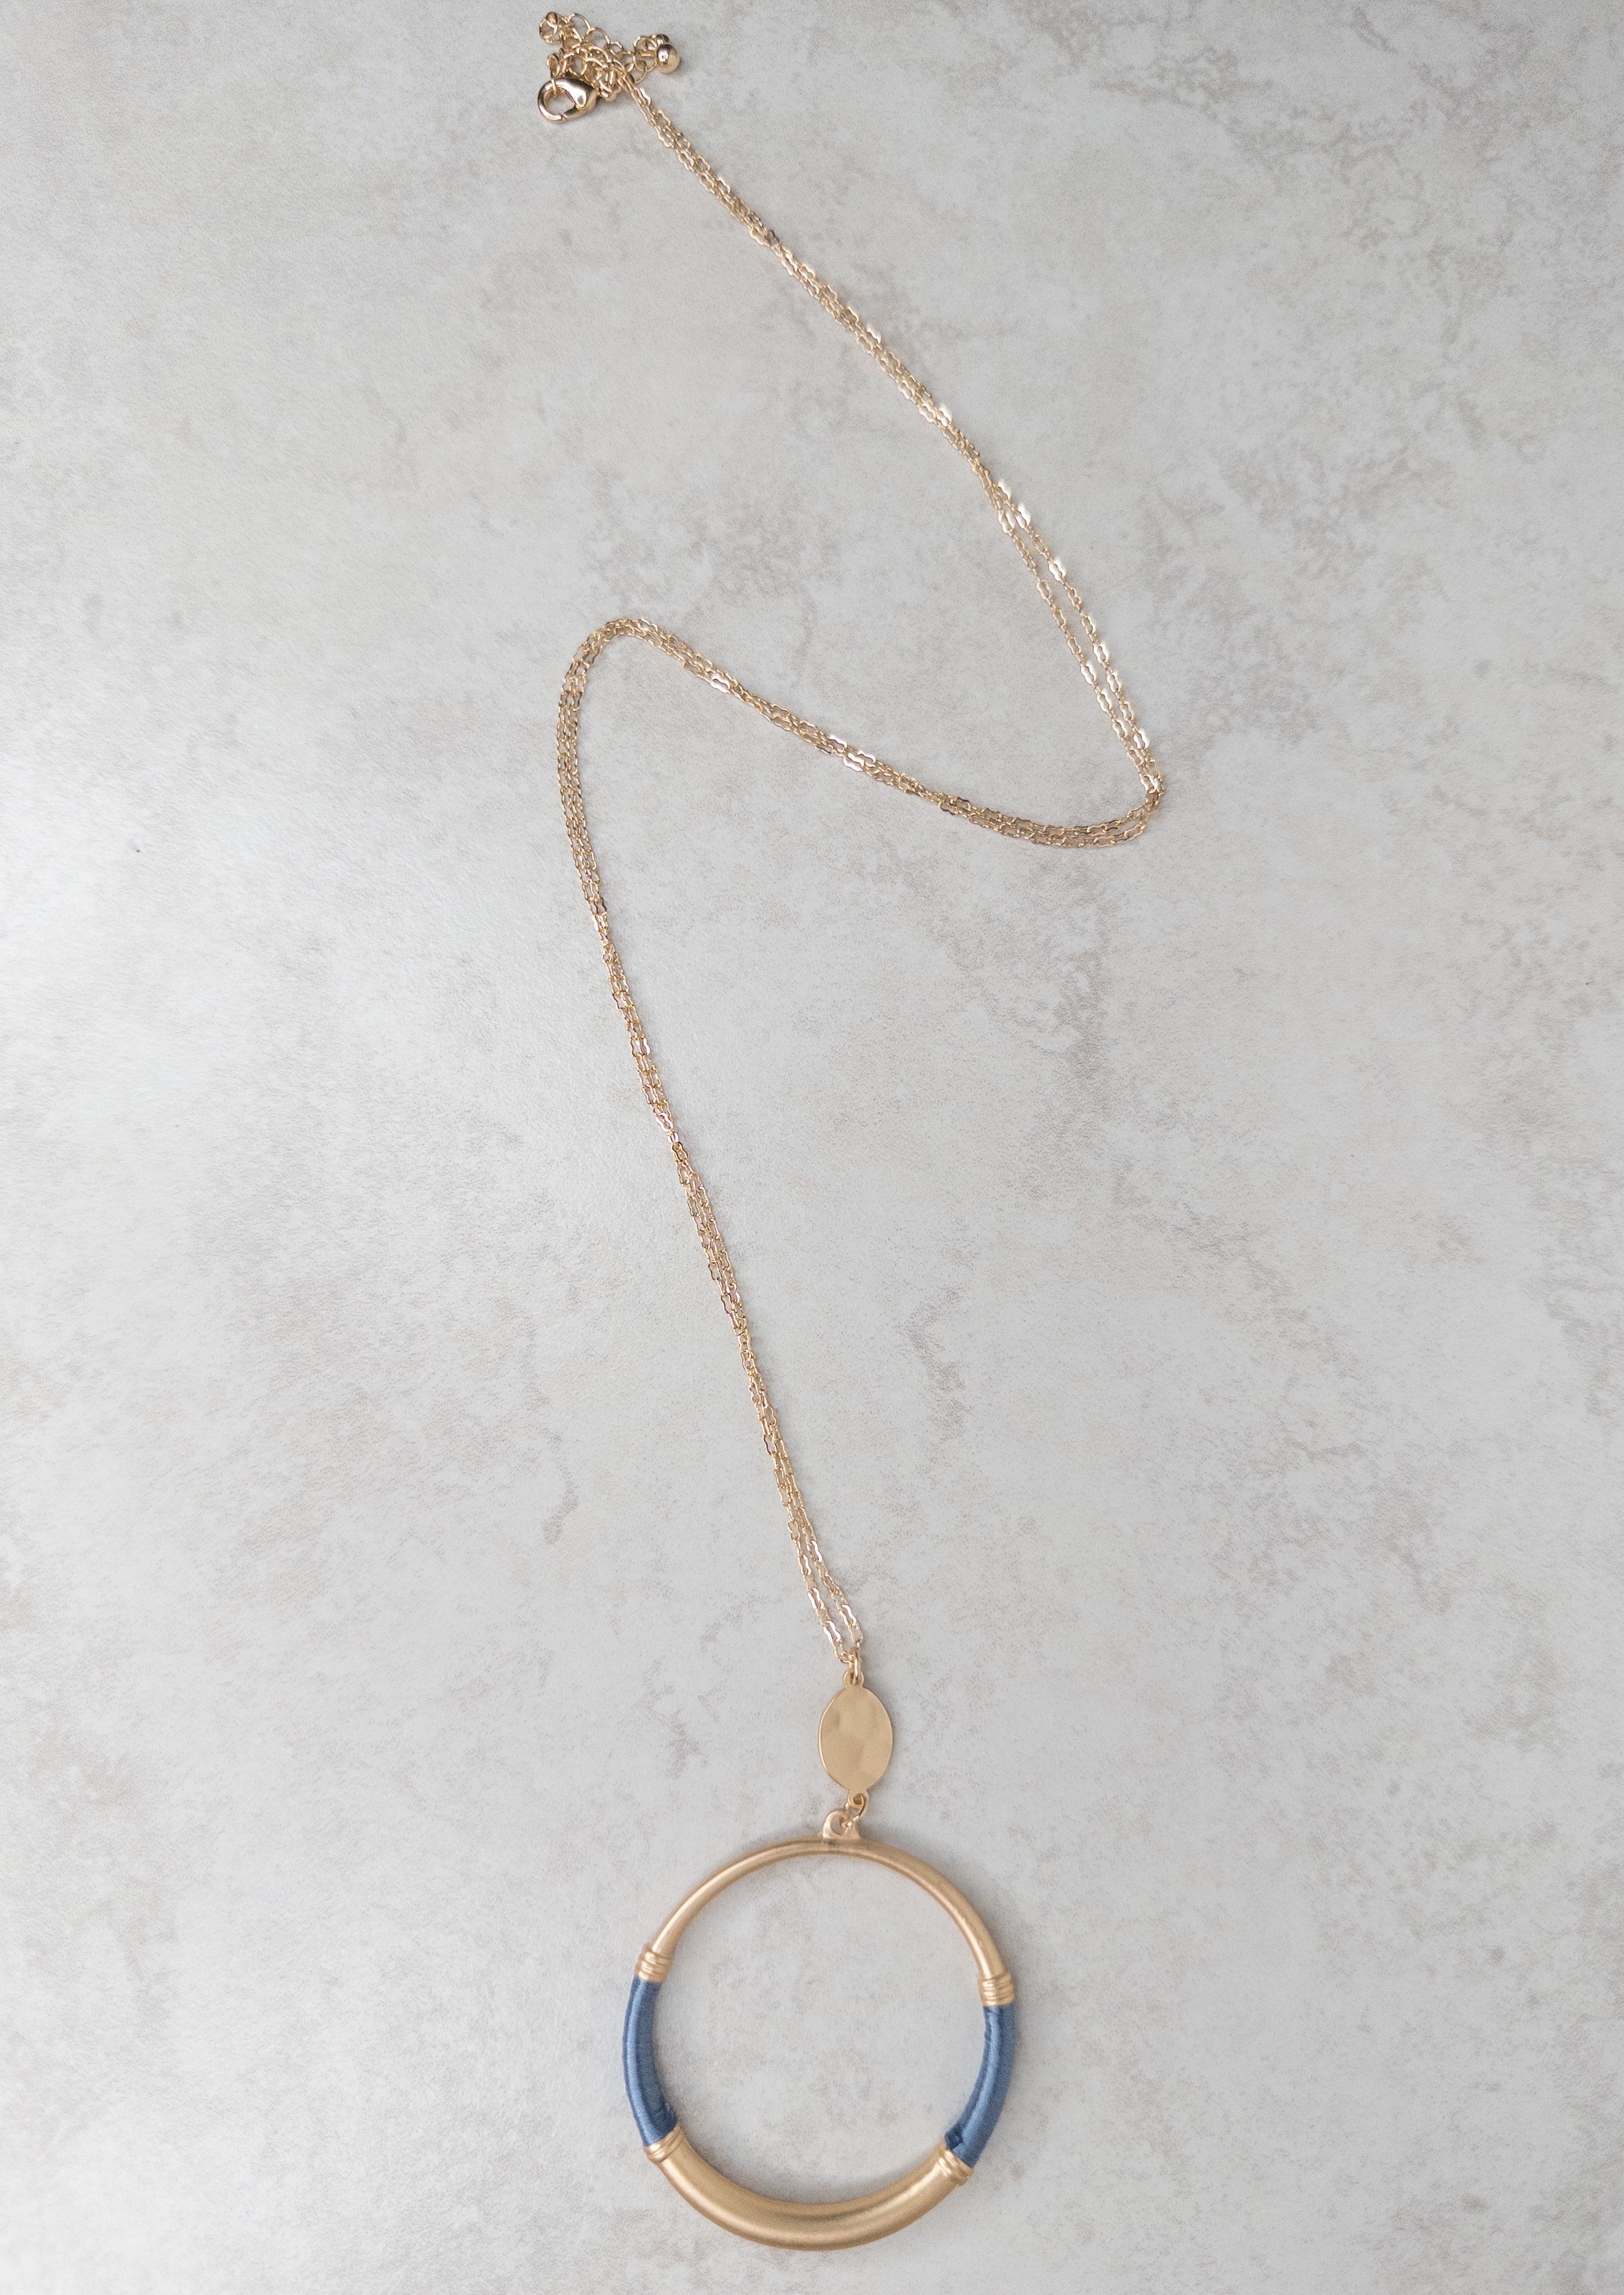 Gold and Dusty Blue Circle Necklace